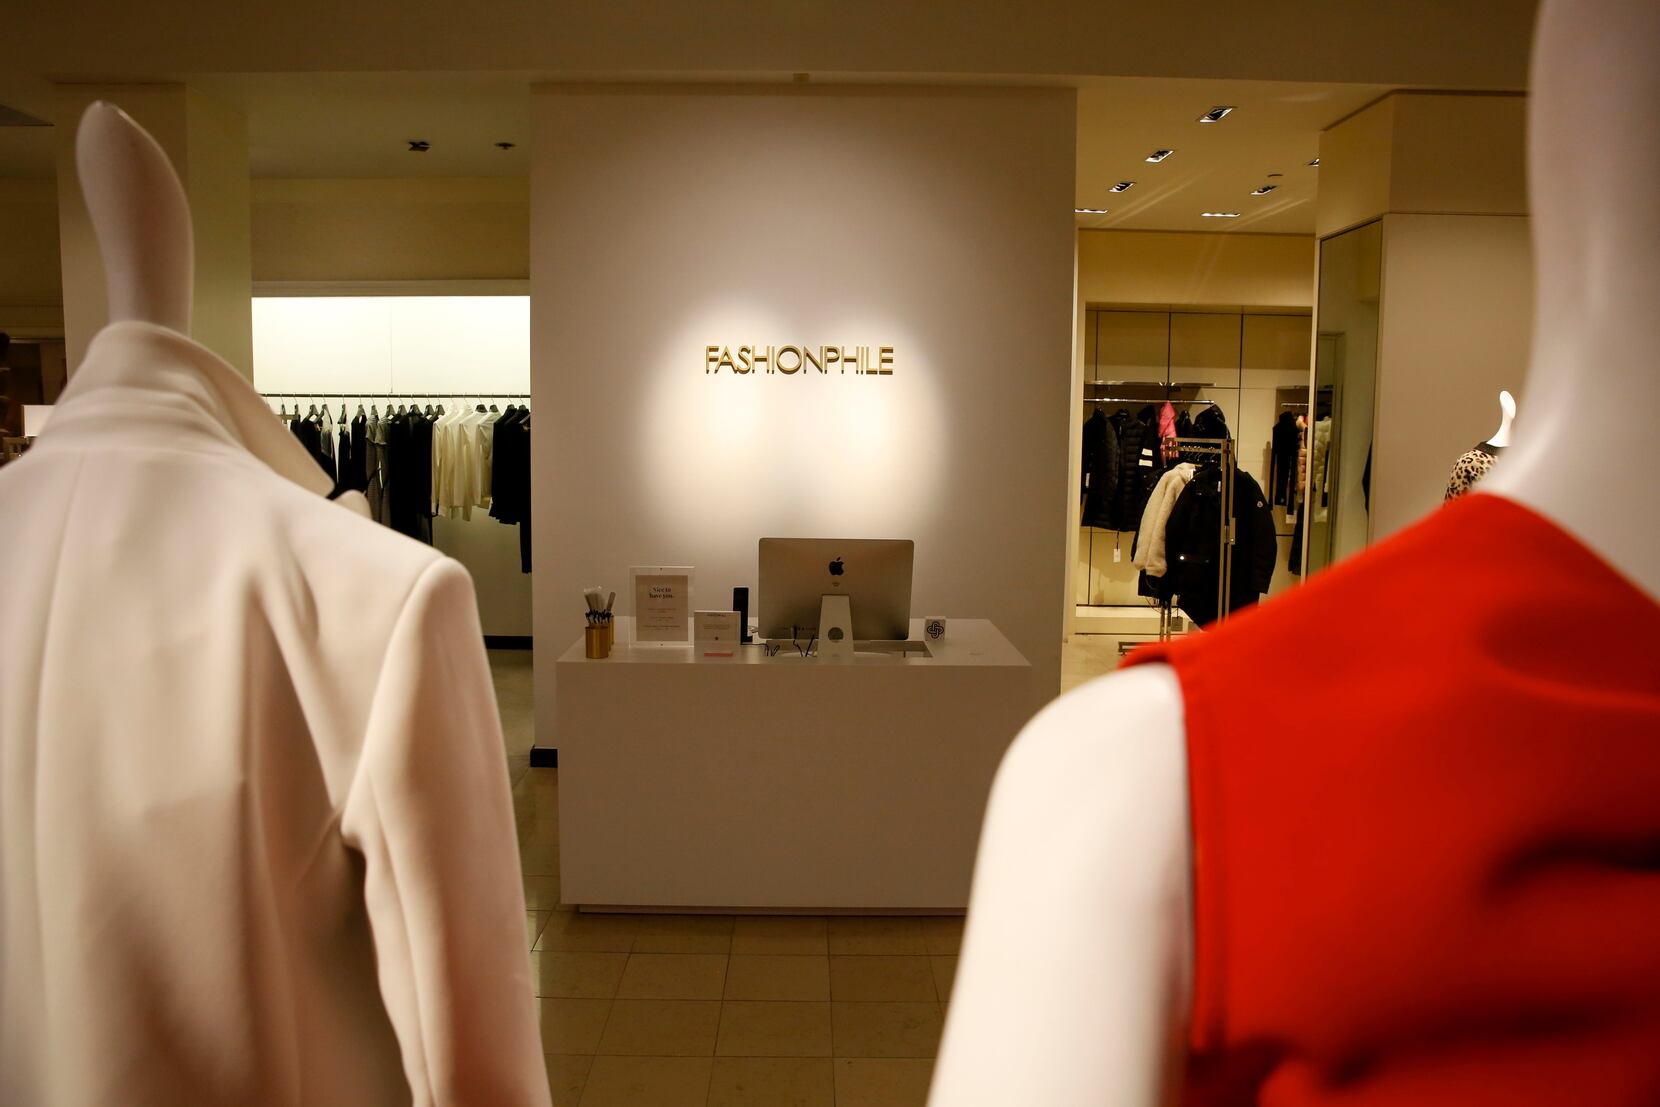 Neiman Marcus Group Takes Stake in Reseller Fashionphile, Adds  Sustainability Partnerships - Retail TouchPoints